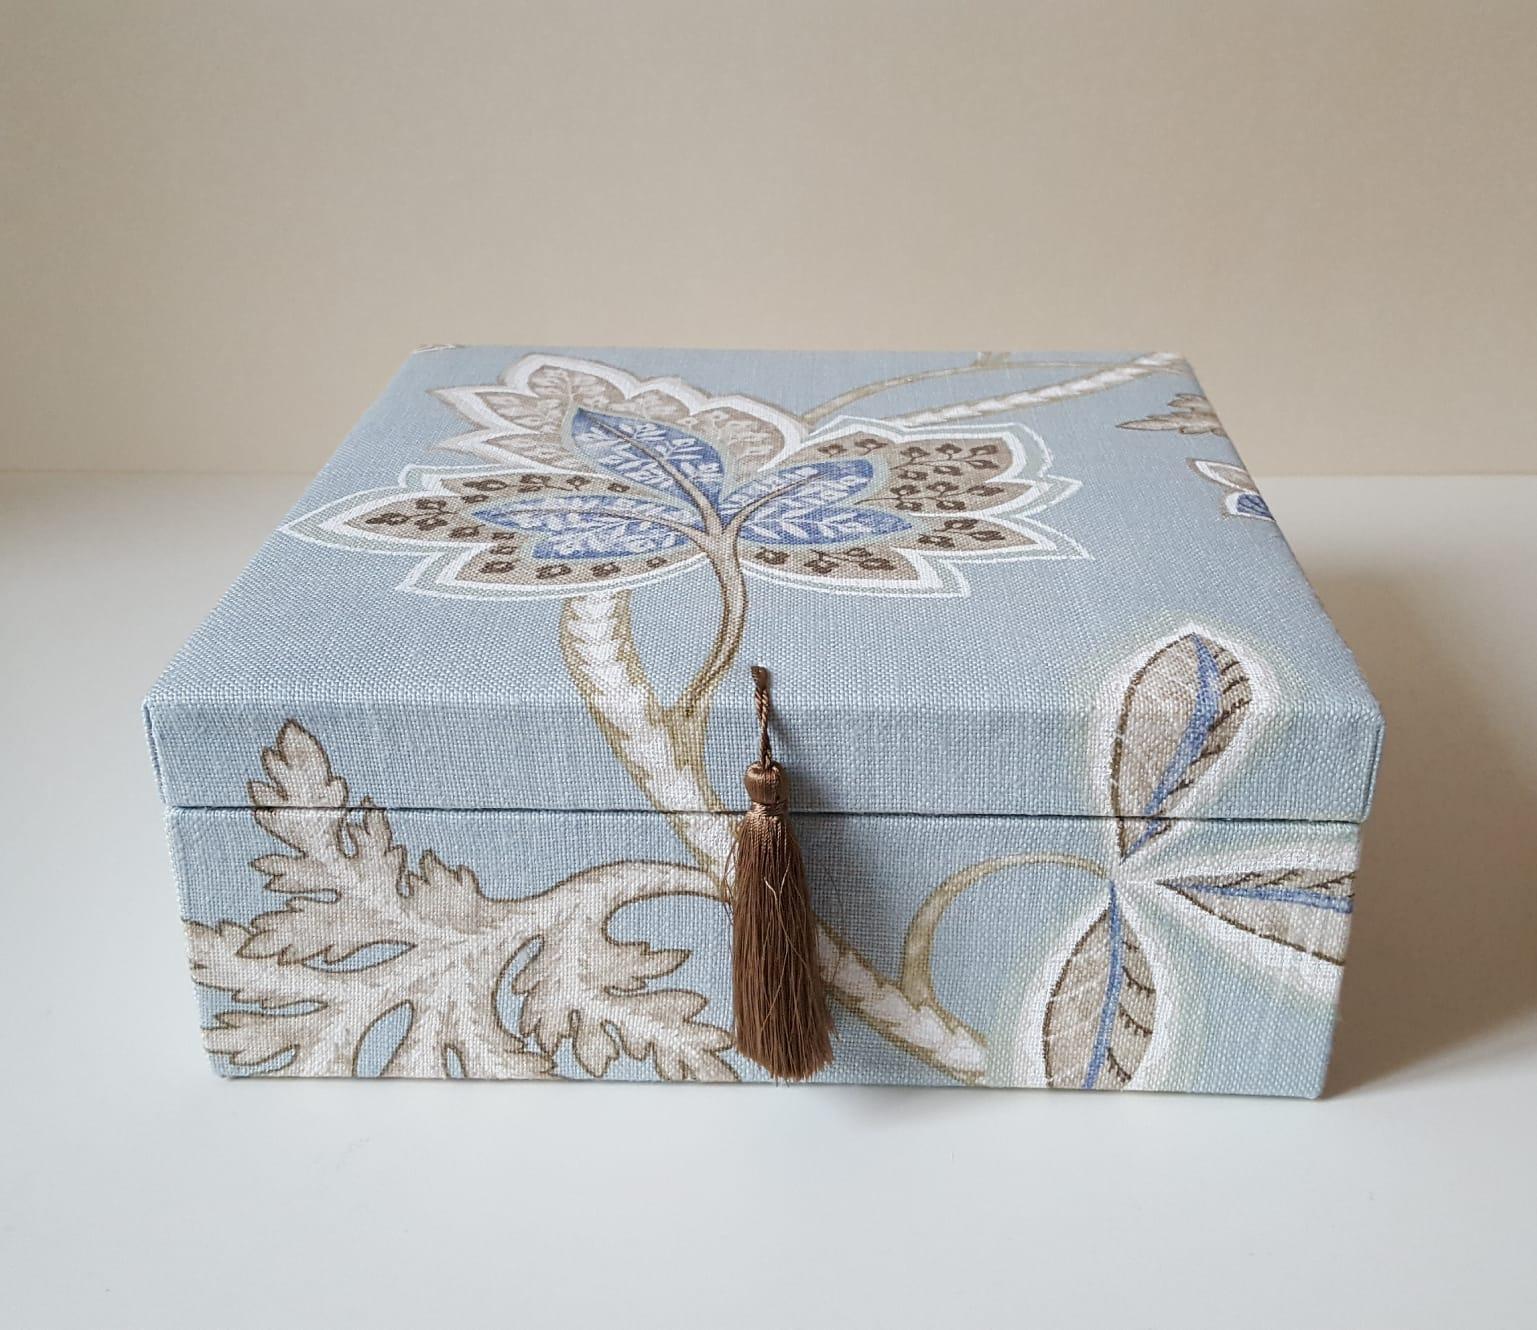 Beautiful storage box, Perfect for storing your Hermès scarves !

Made of wood cardboard and covered with Linen Fabric

The lid is lightly padded and embellished with a brown pompom

Pattern: Leaves

Colorways: Blue, Beige, White

The box can